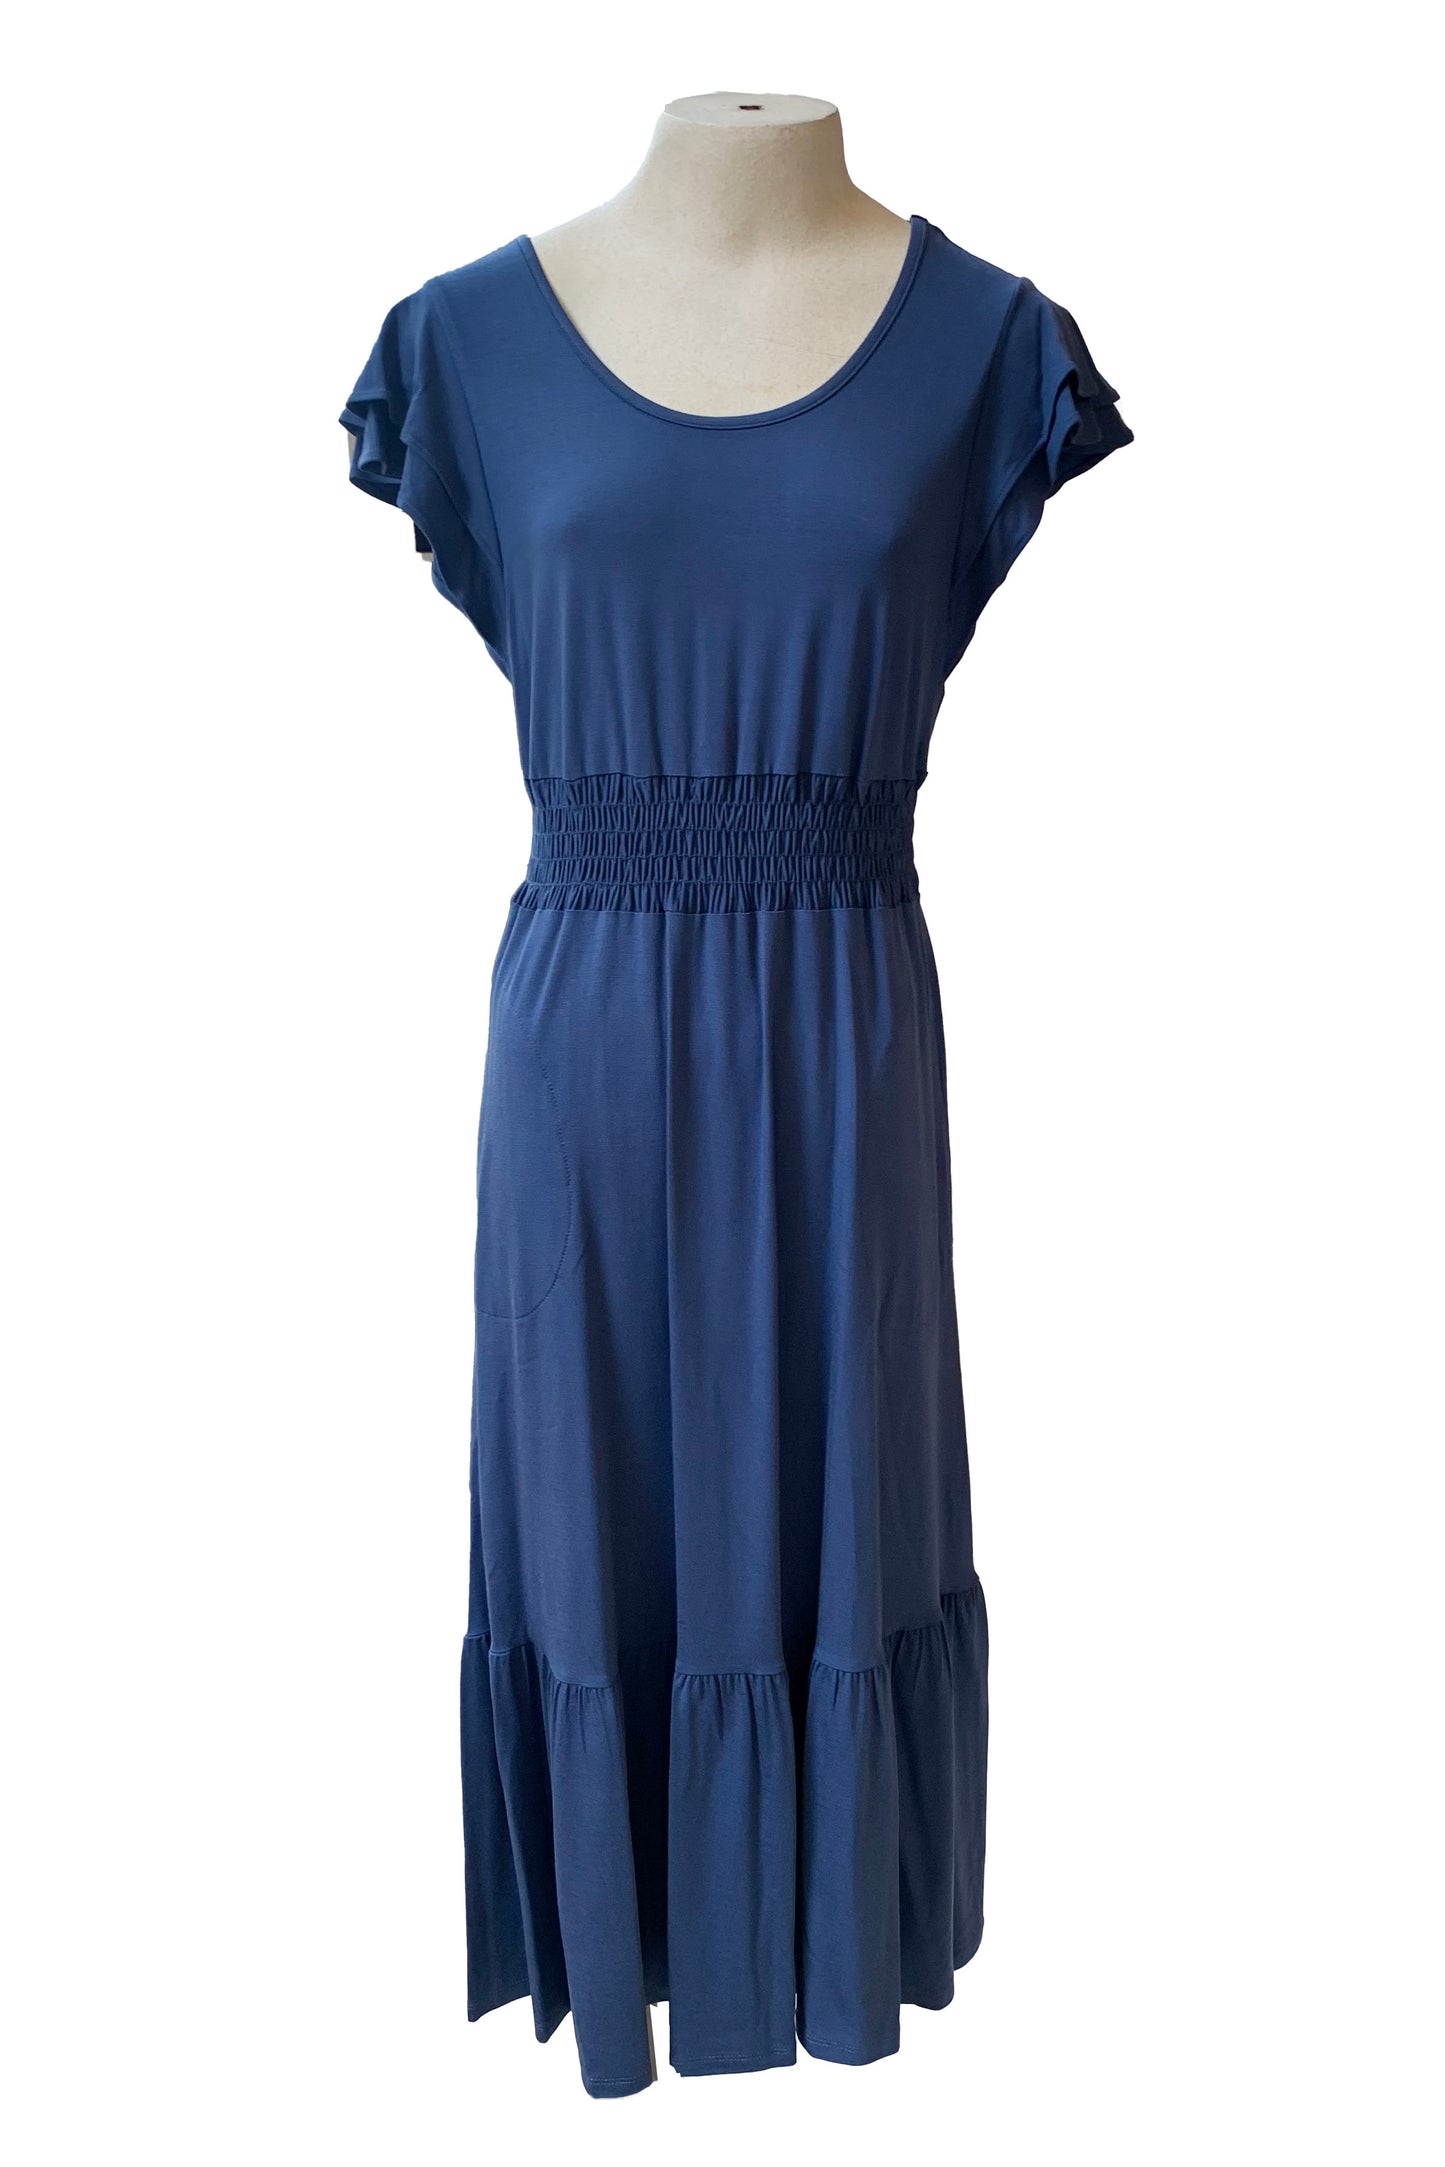 The Cherlyn Dress by Pure Essence in Navy is shown on a mannequin in front of a white background 